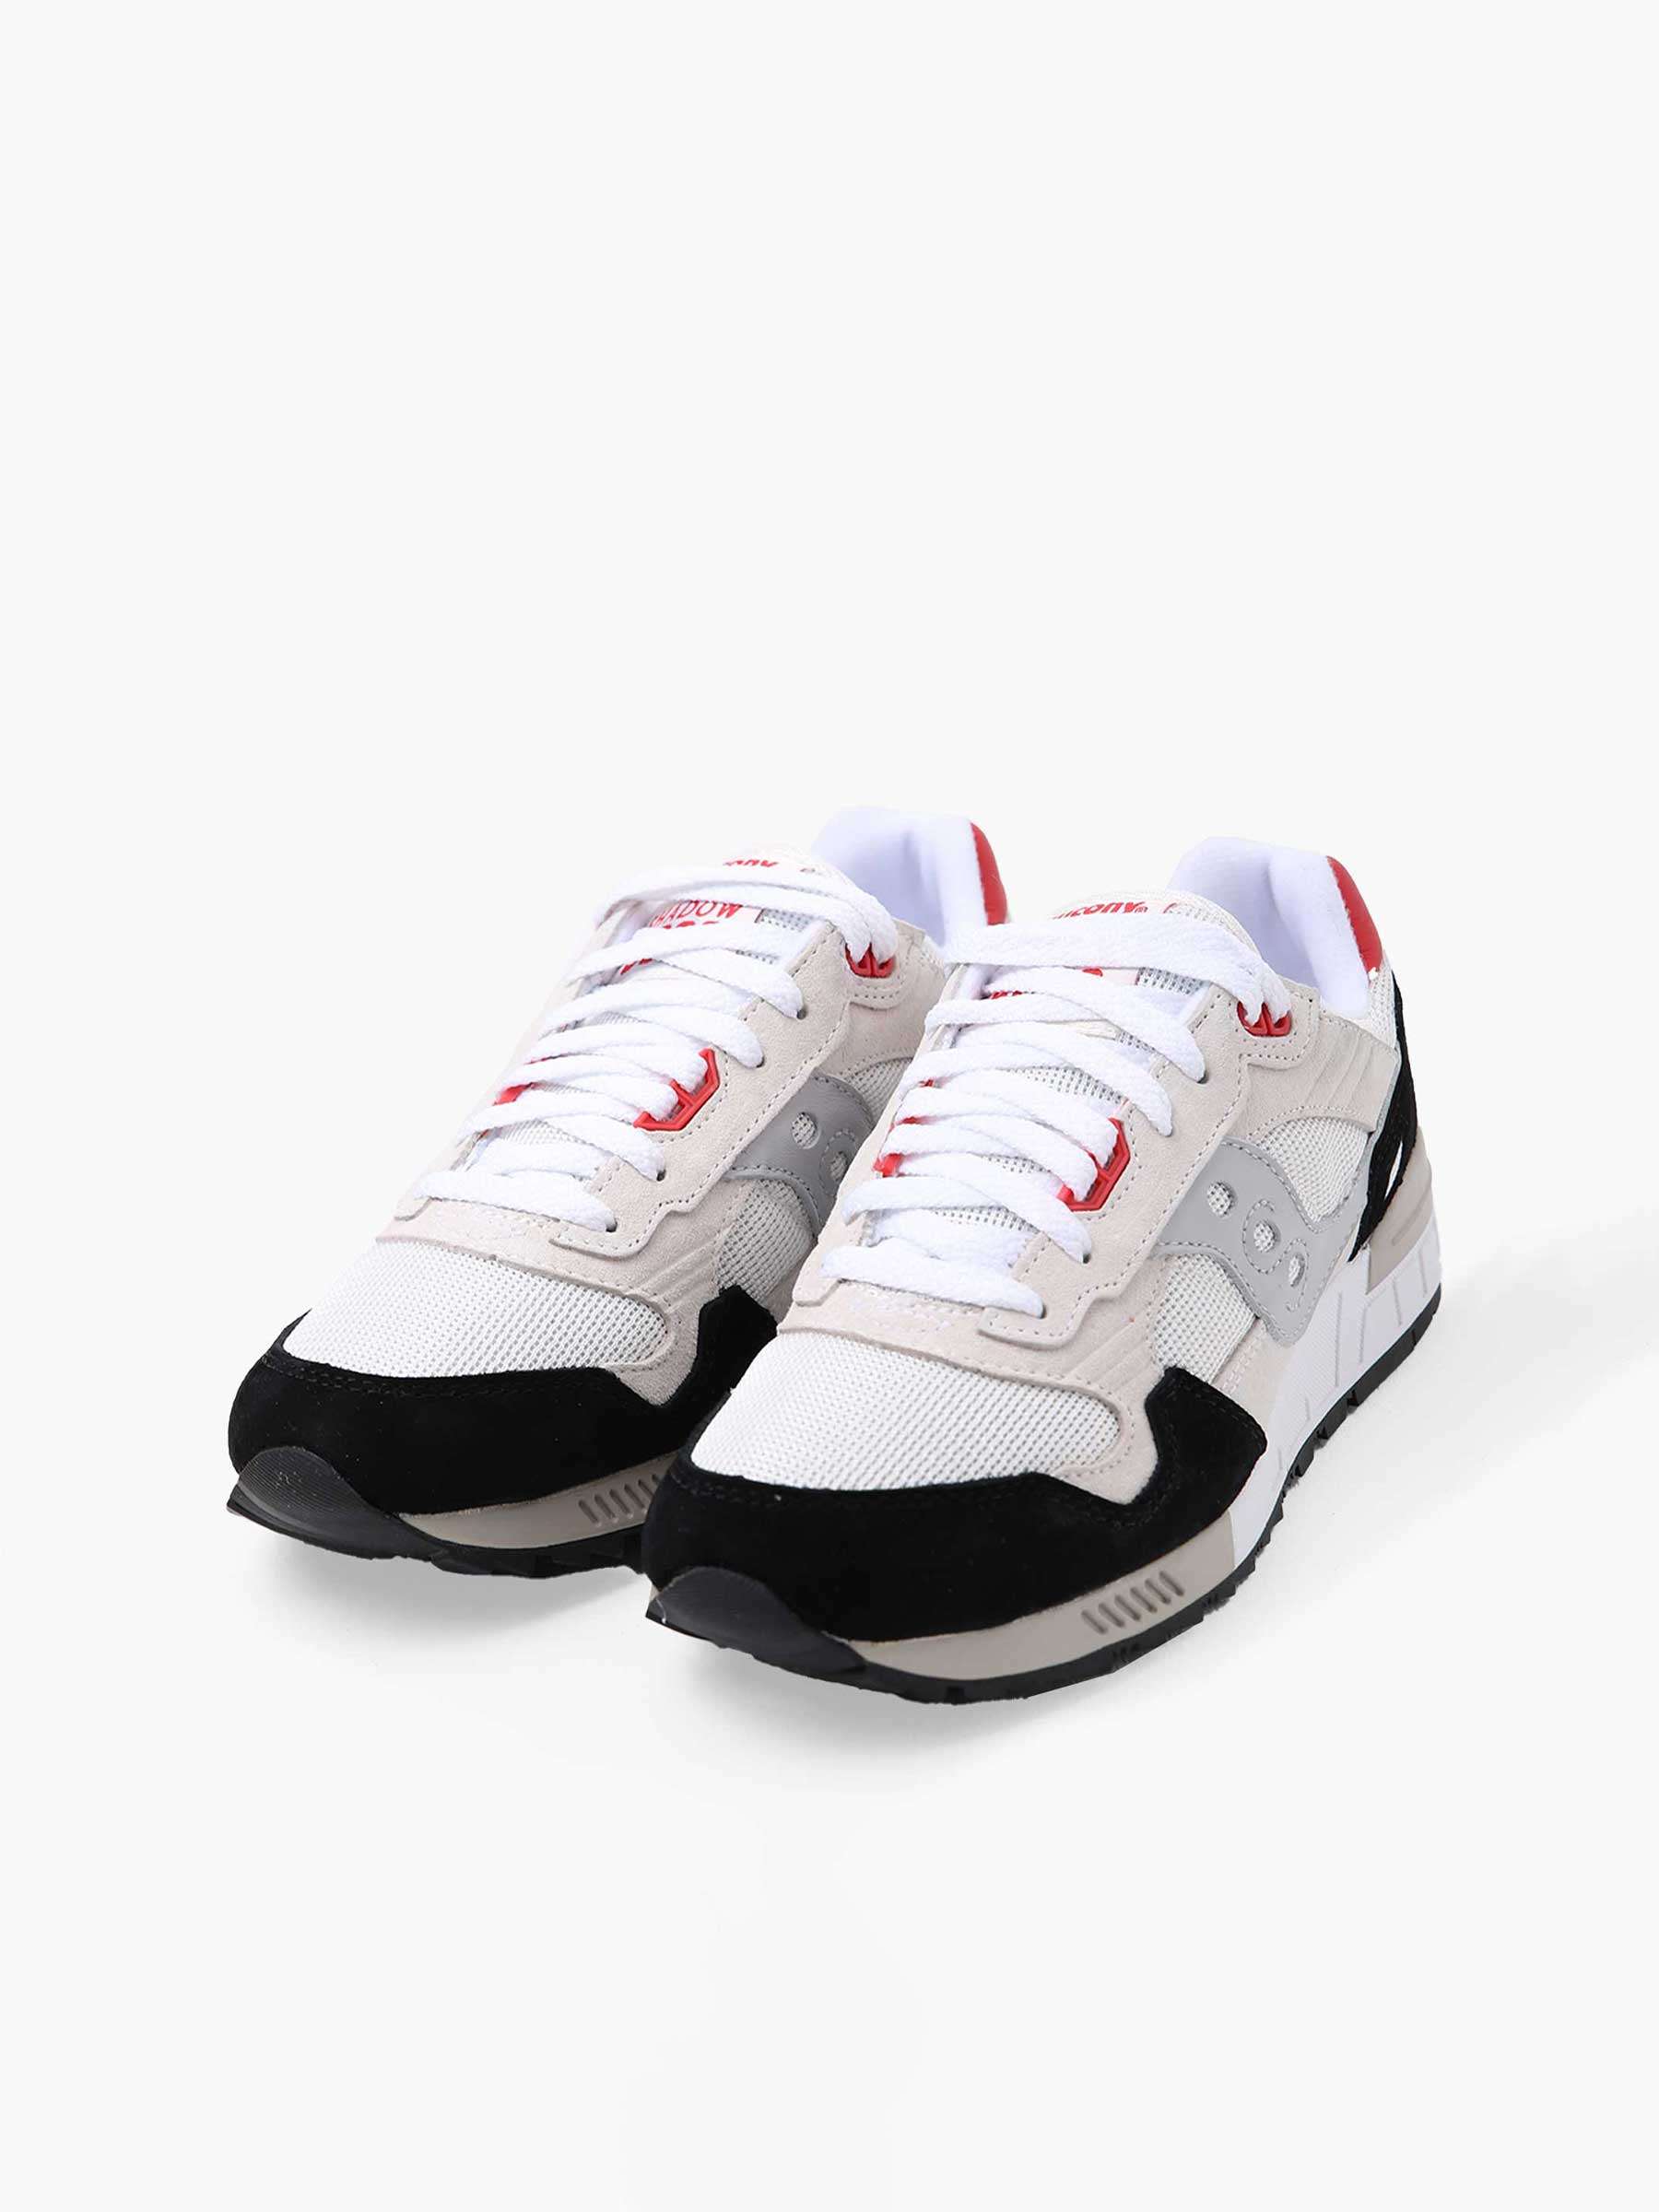 Shadow 5000 White Black Red S70665-25